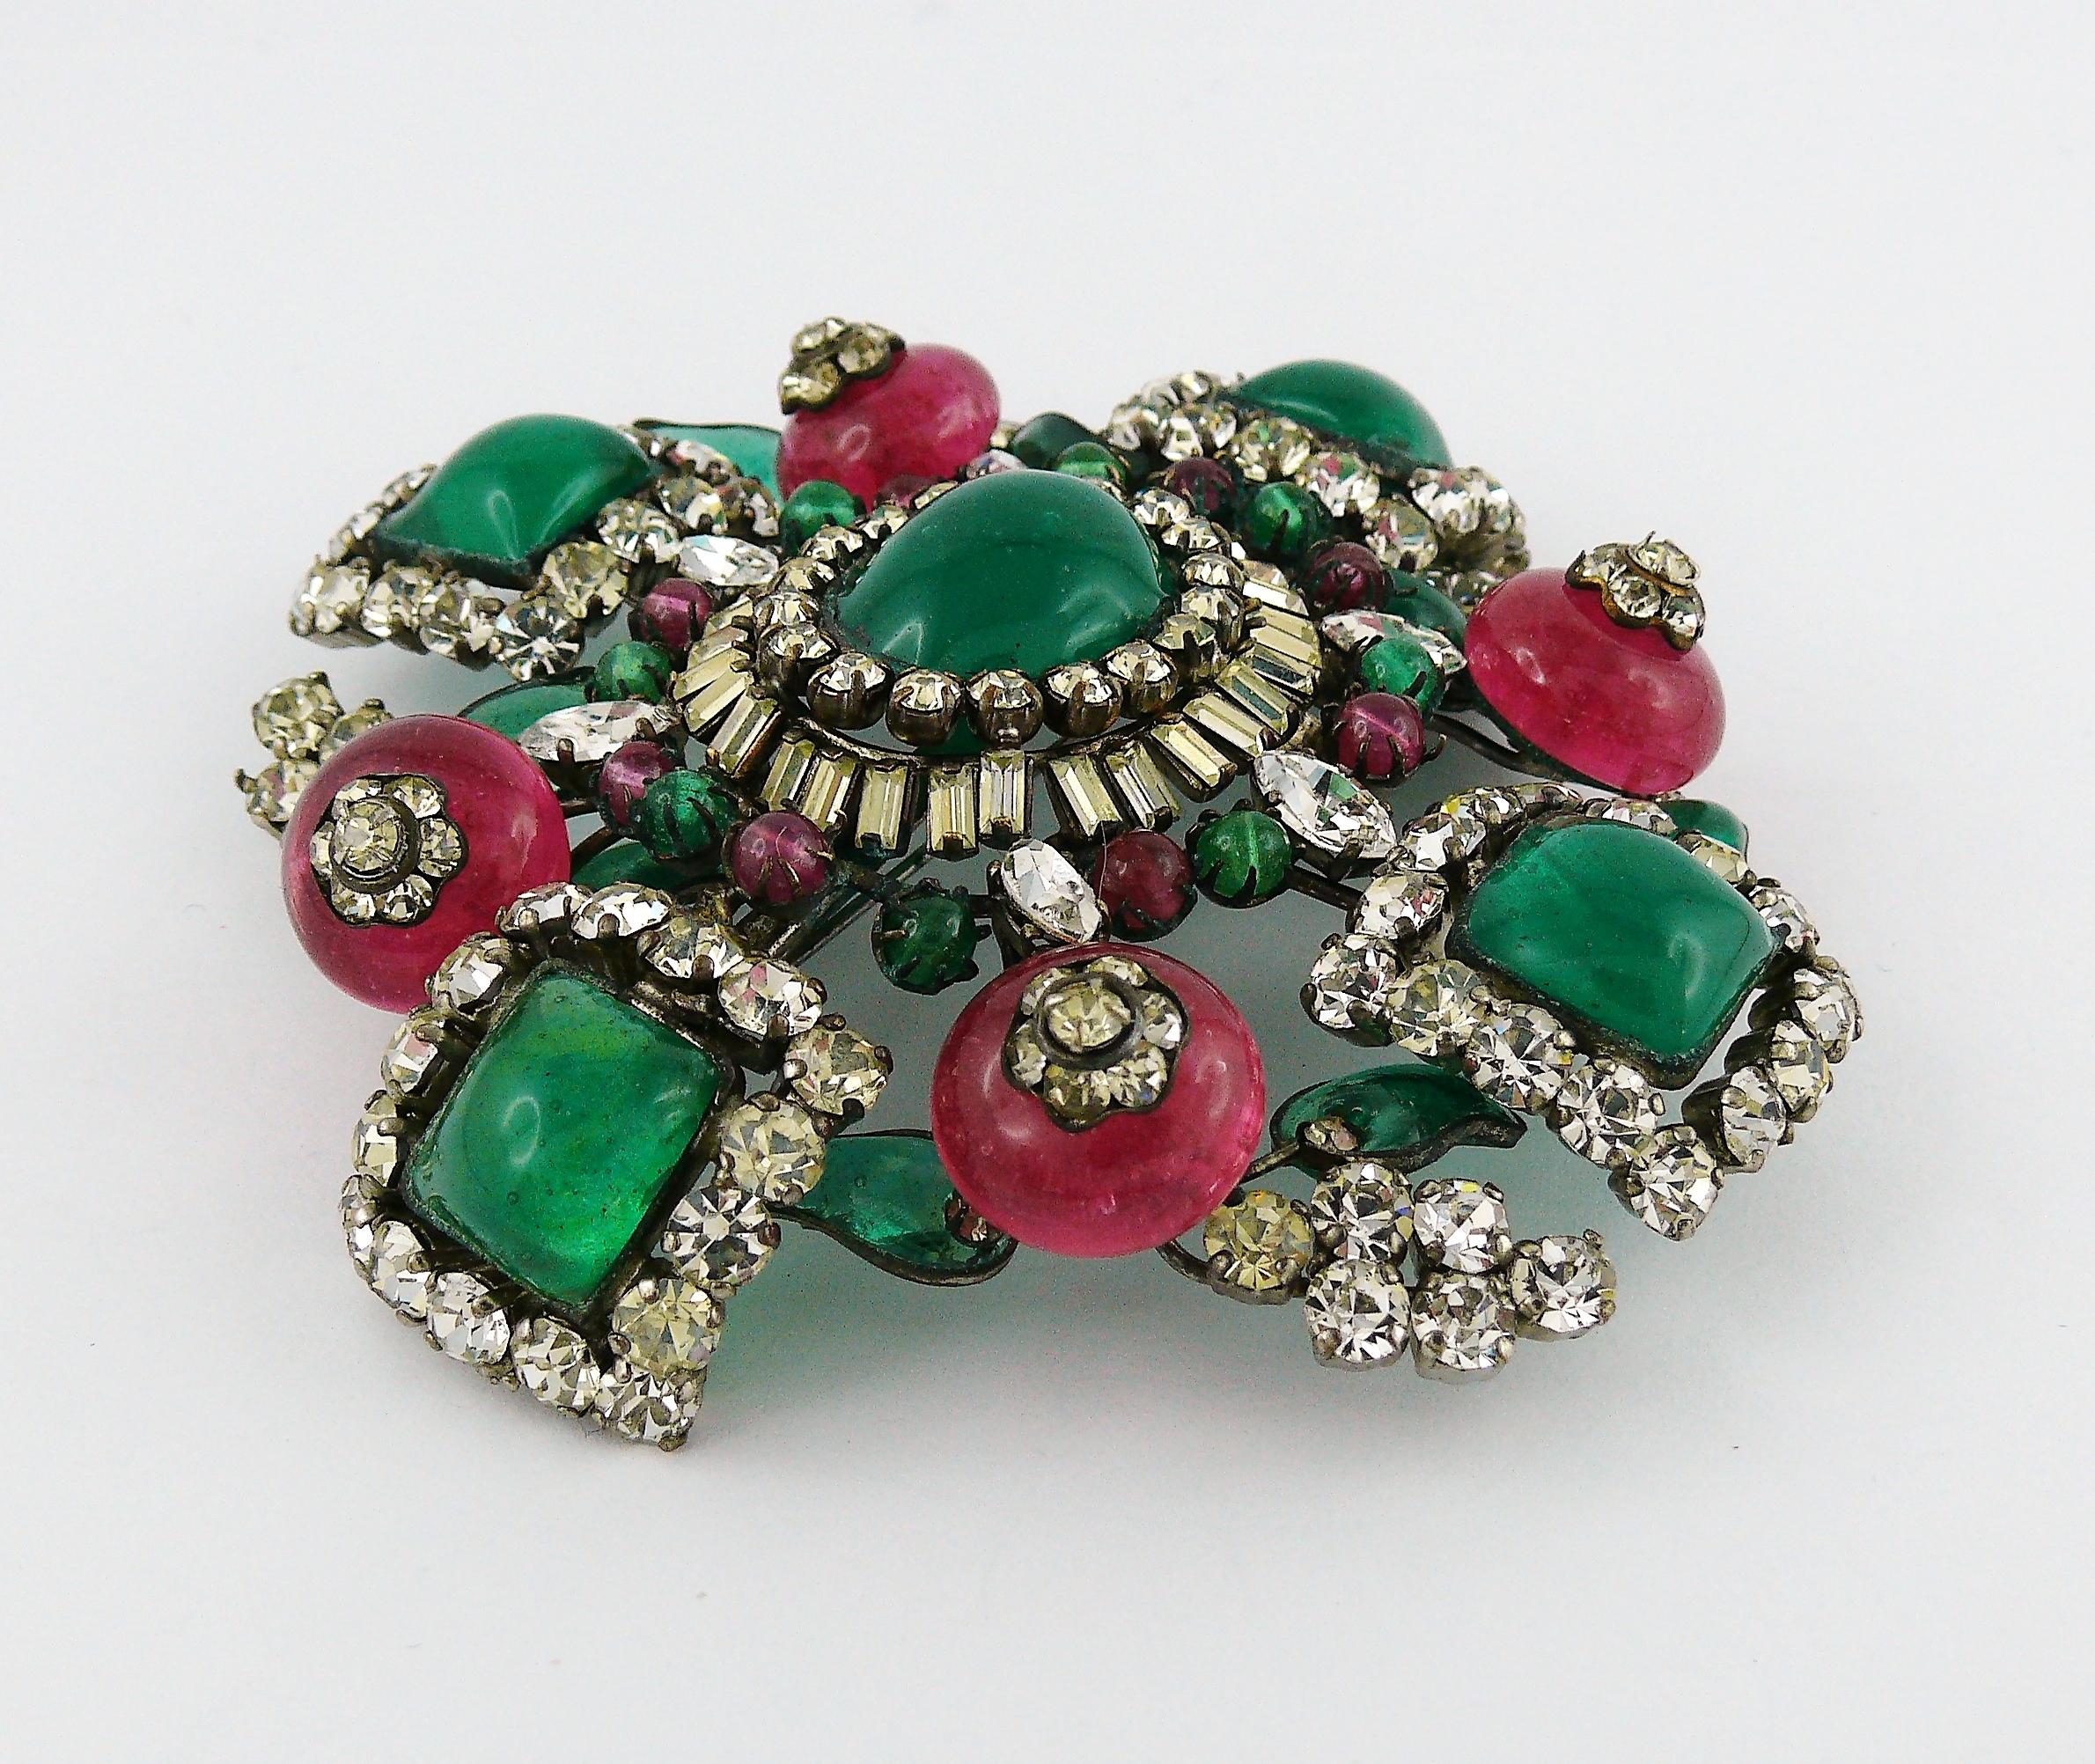 Magnificent Vintage Poured Glass Jewelled Massive Brooch Pendant  2